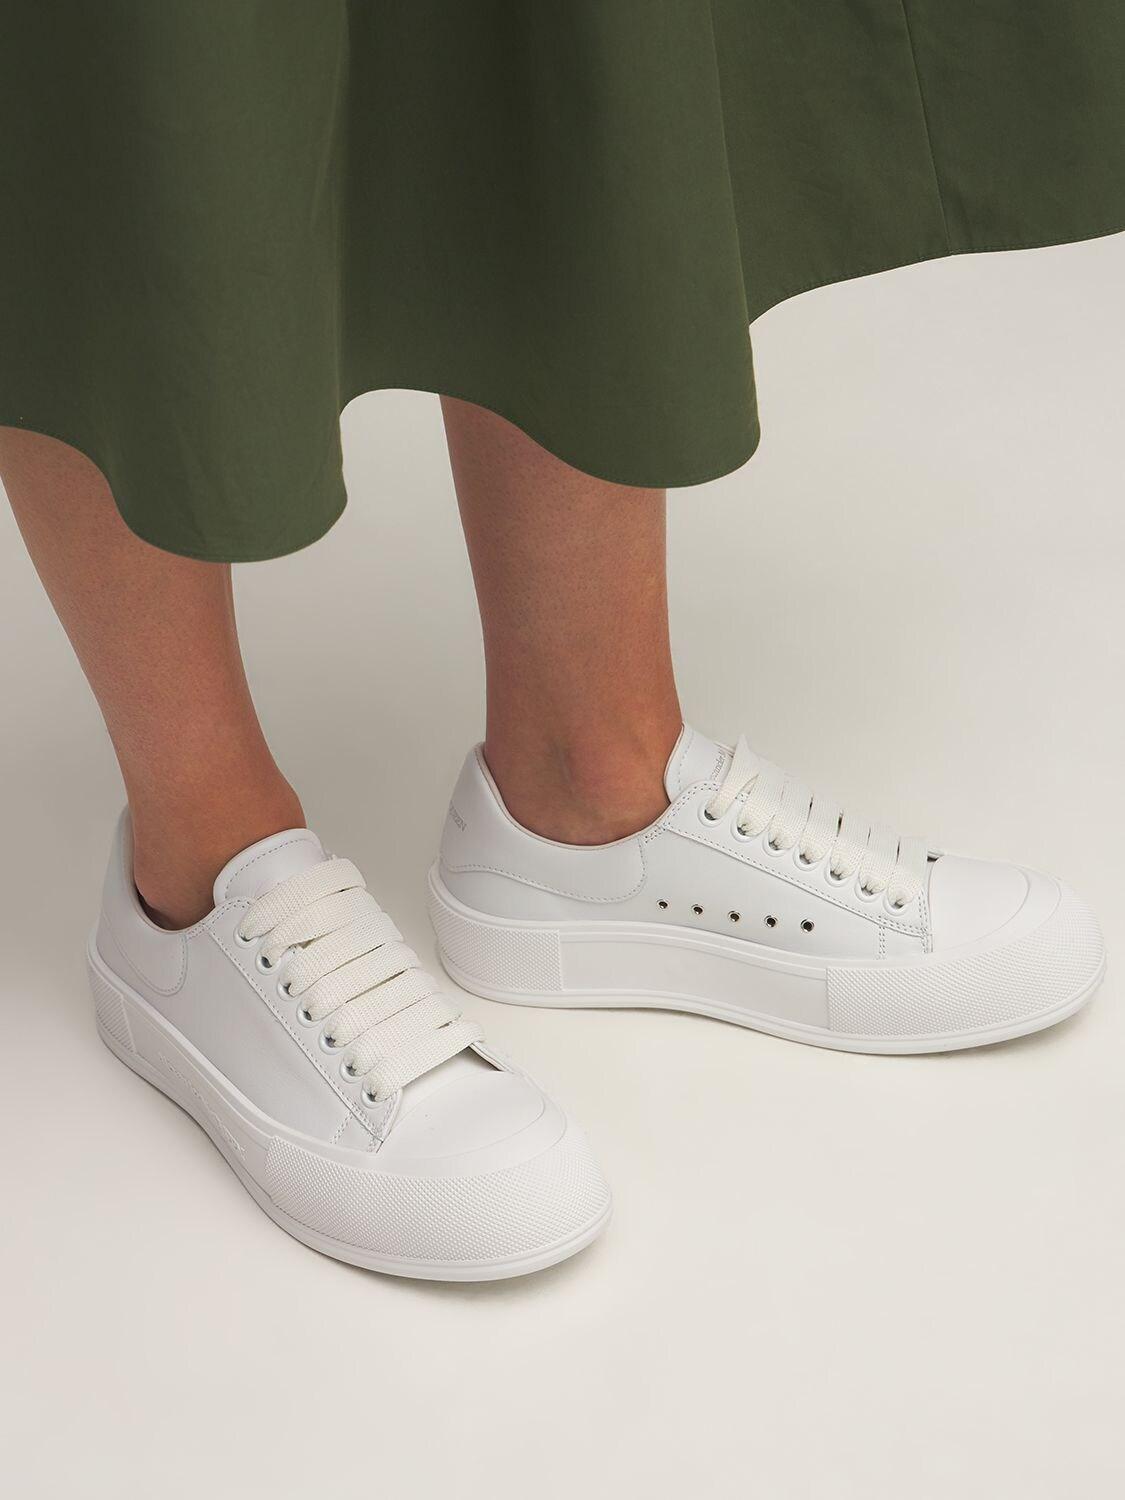 Alexander McQueen 45mm Deck Plimsoll Leather Sneakers in White | Lyst